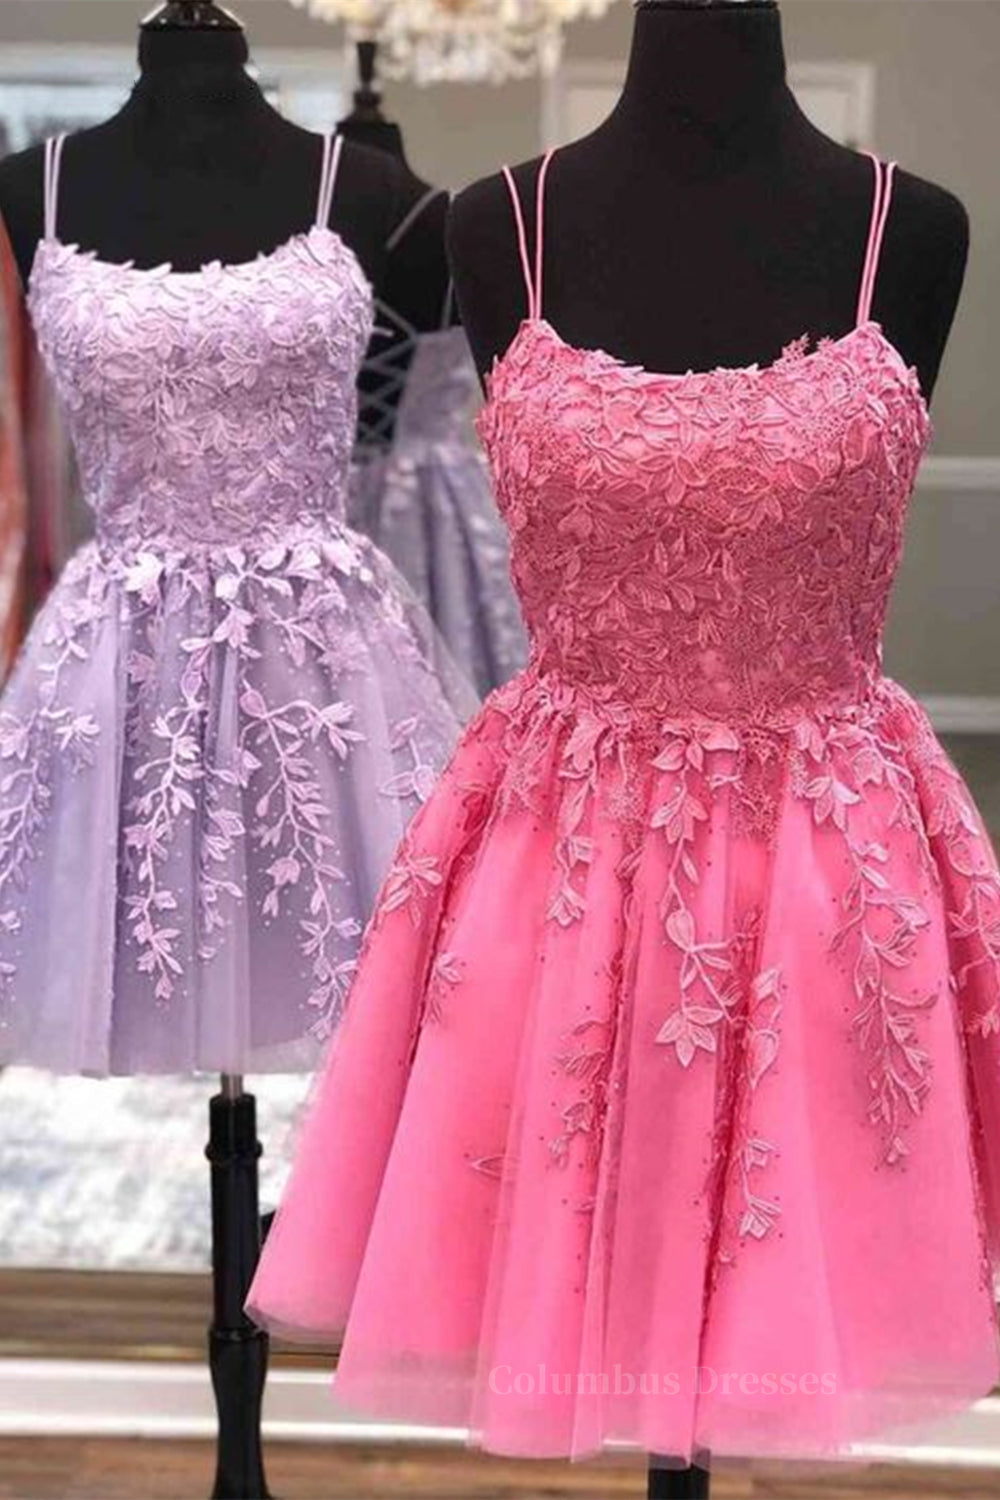 Party Dress Long Sleeve, Short A Line Thin Straps Lace Prom Dress, Lace Homecoming Dress, Short Formal Evening Dress